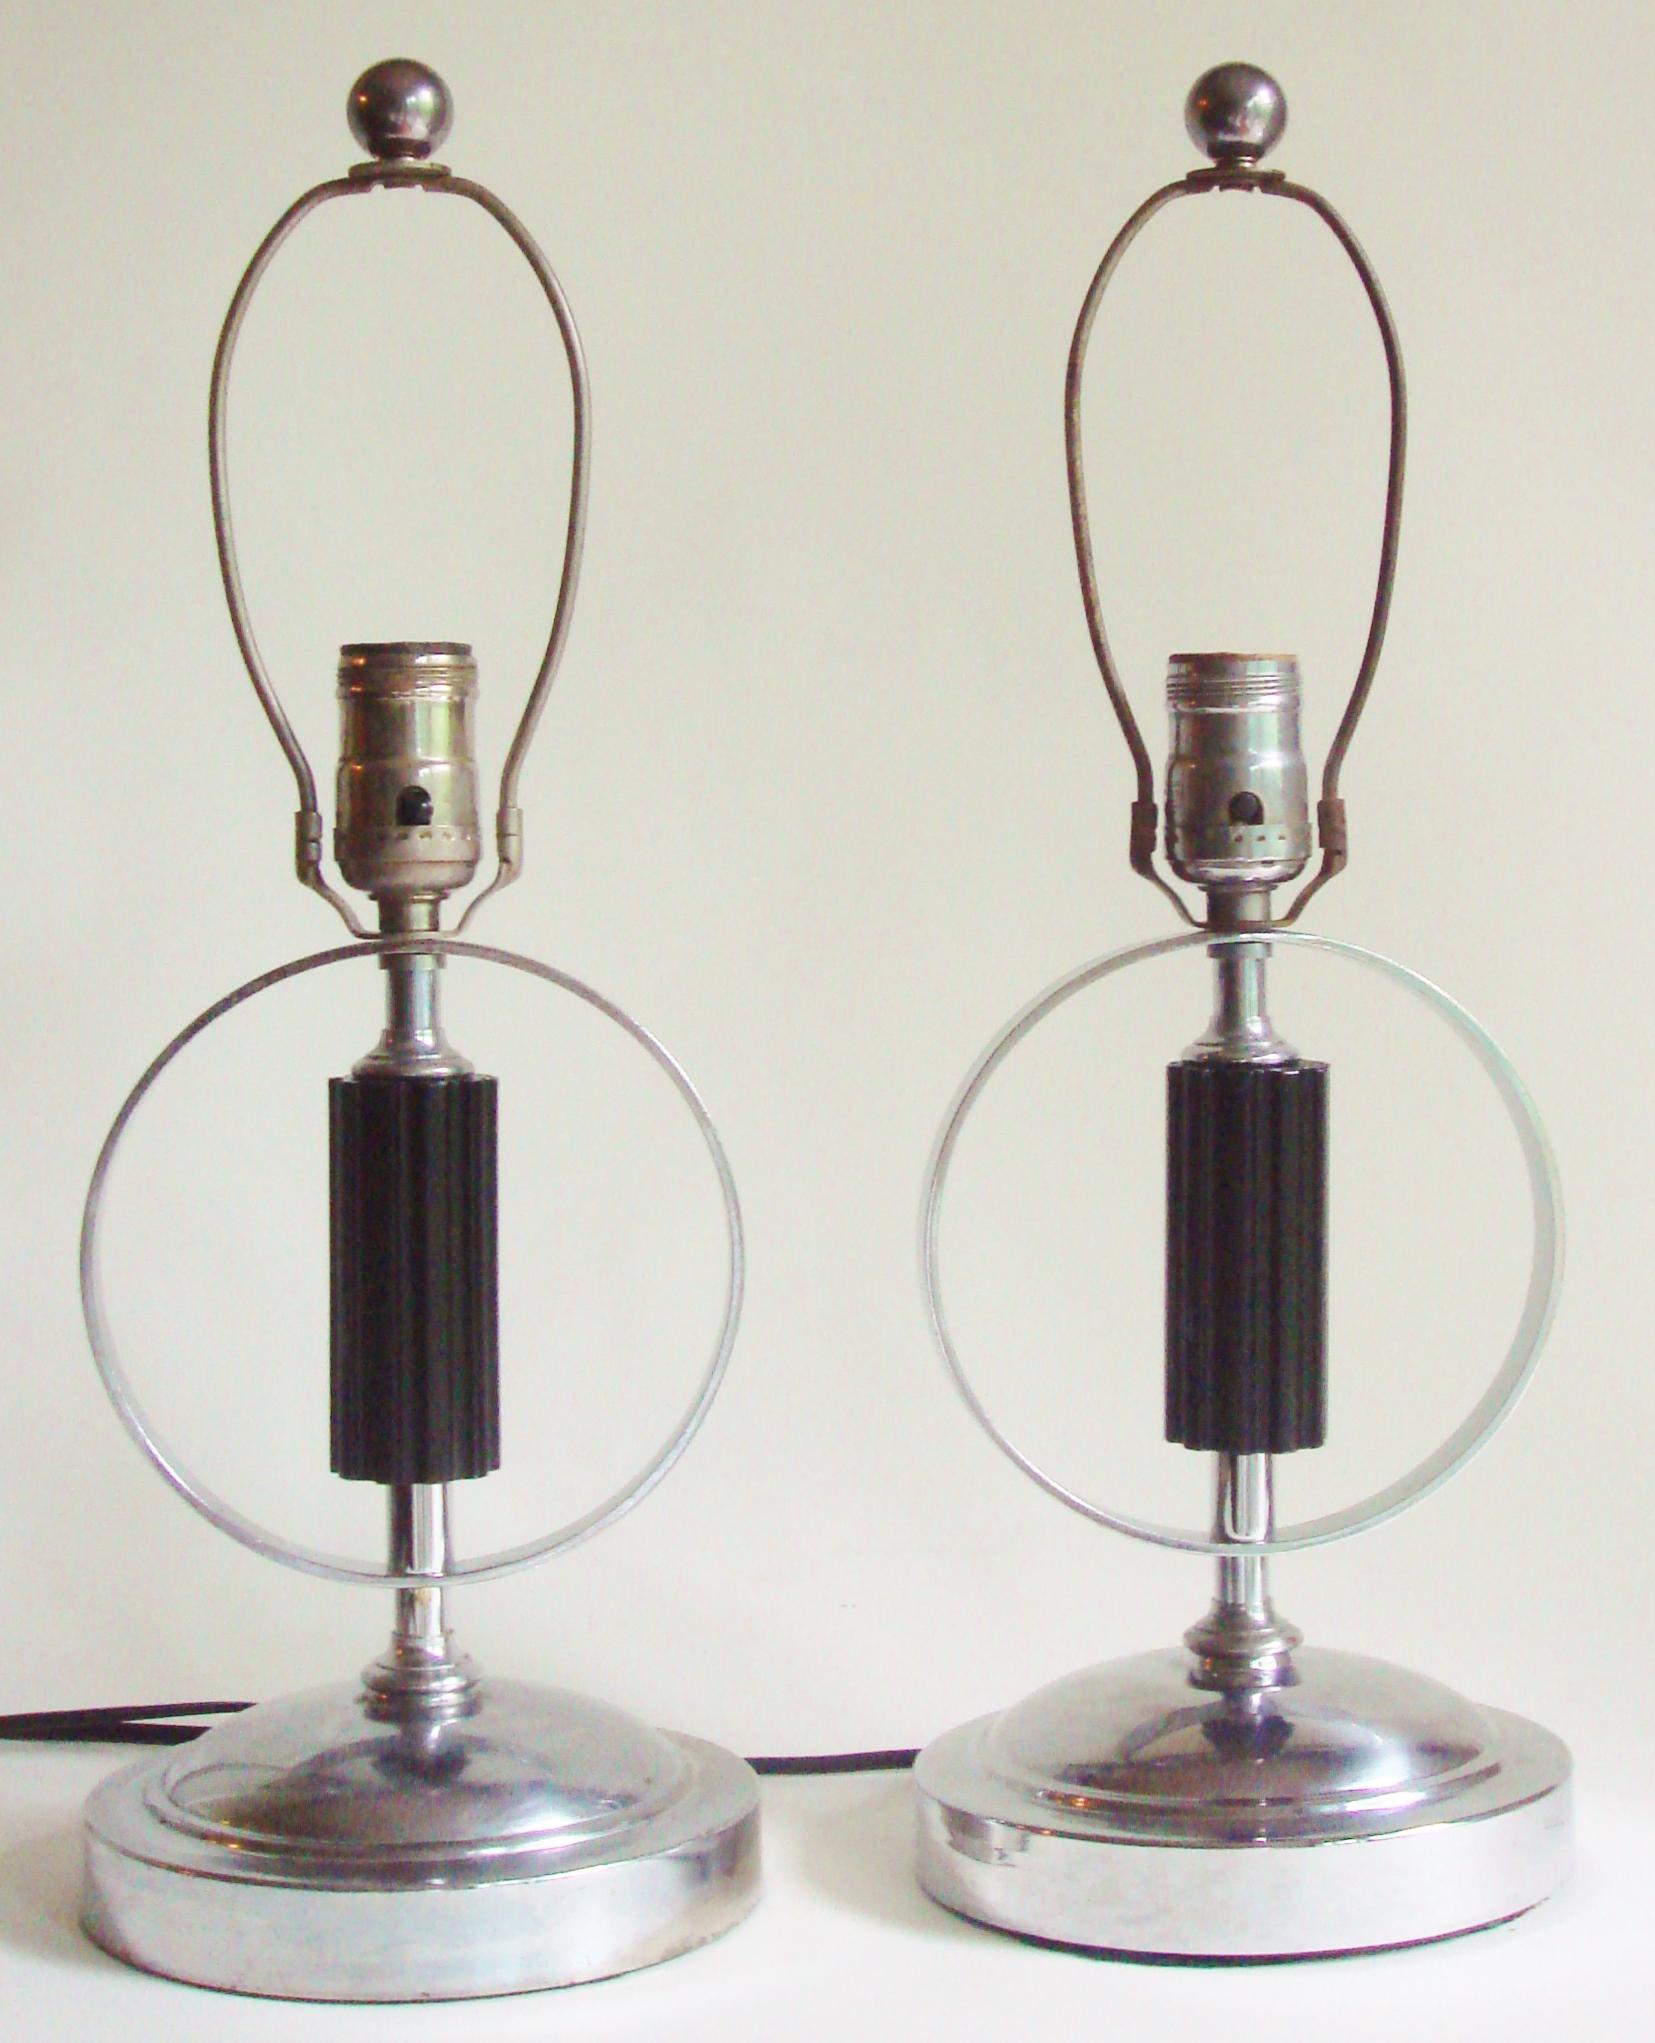 This striking pair of American Art Deco/Machine Age table or console lamps each feature a stepped and domed circular base. The main chrome shaft of each of the lamps is interrupted by a black lacquered and fluted wooden column fragment that is